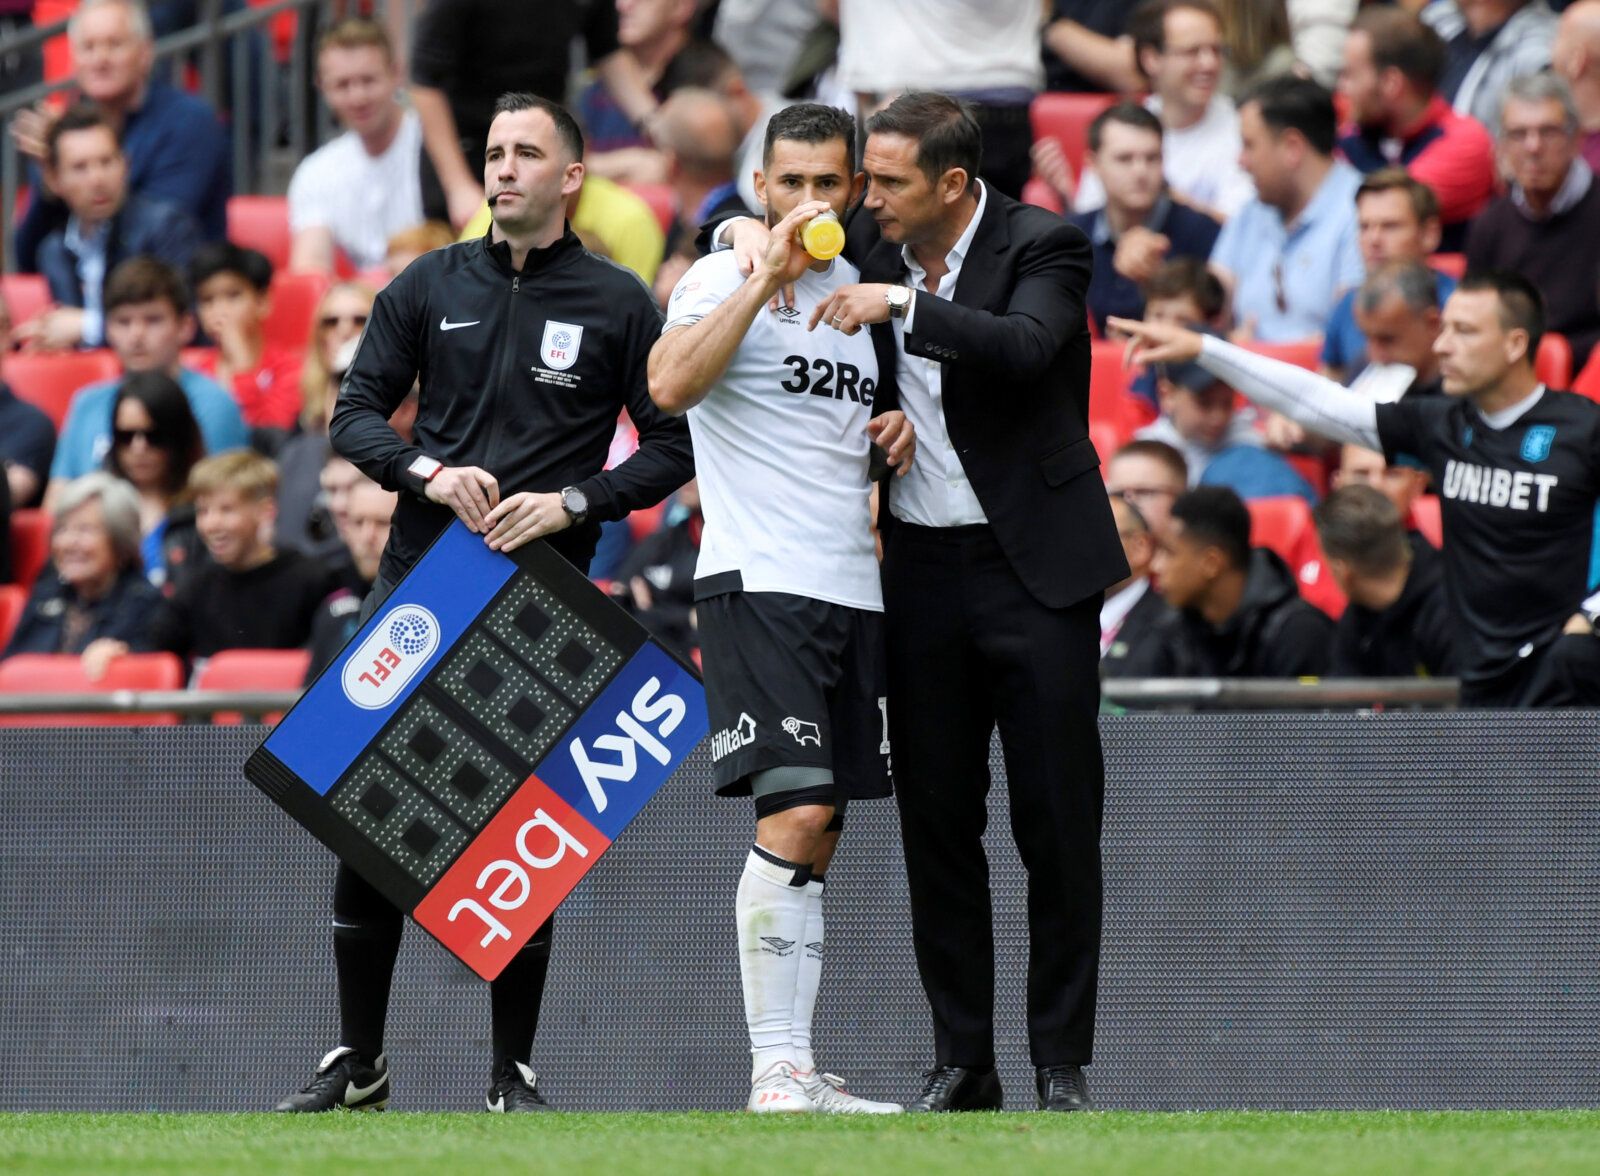 Soccer Football - Championship Playoff Final - Aston Villa v Derby County - Wembley Stadium, London, Britain - May 27, 2019  Derby County manager Frank Lampard gives instructions to Bradley Johnson   Action Images via Reuters/Tony O'Brien